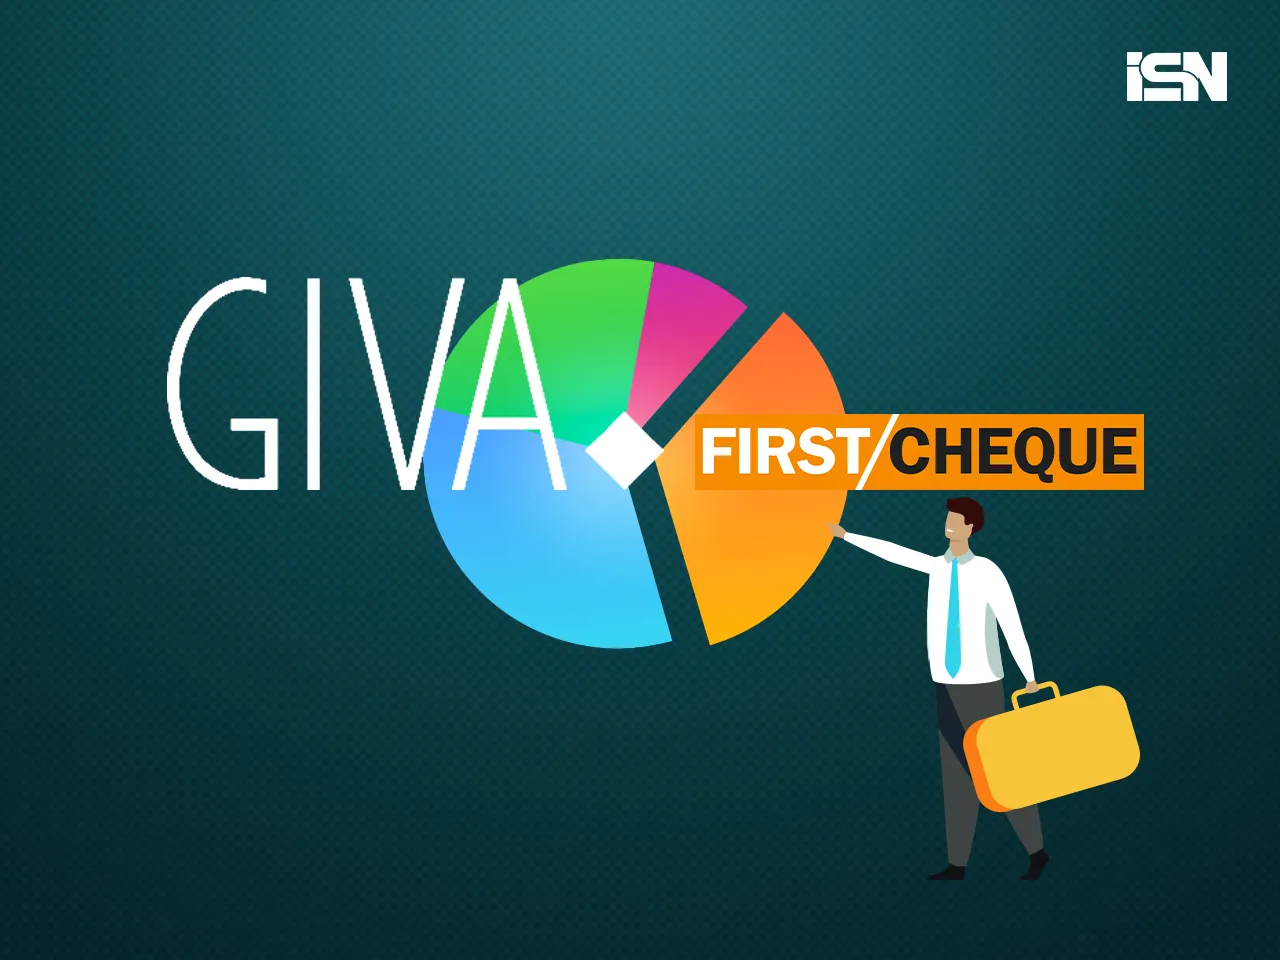 Cheque partially exits jewellery startup GIVA